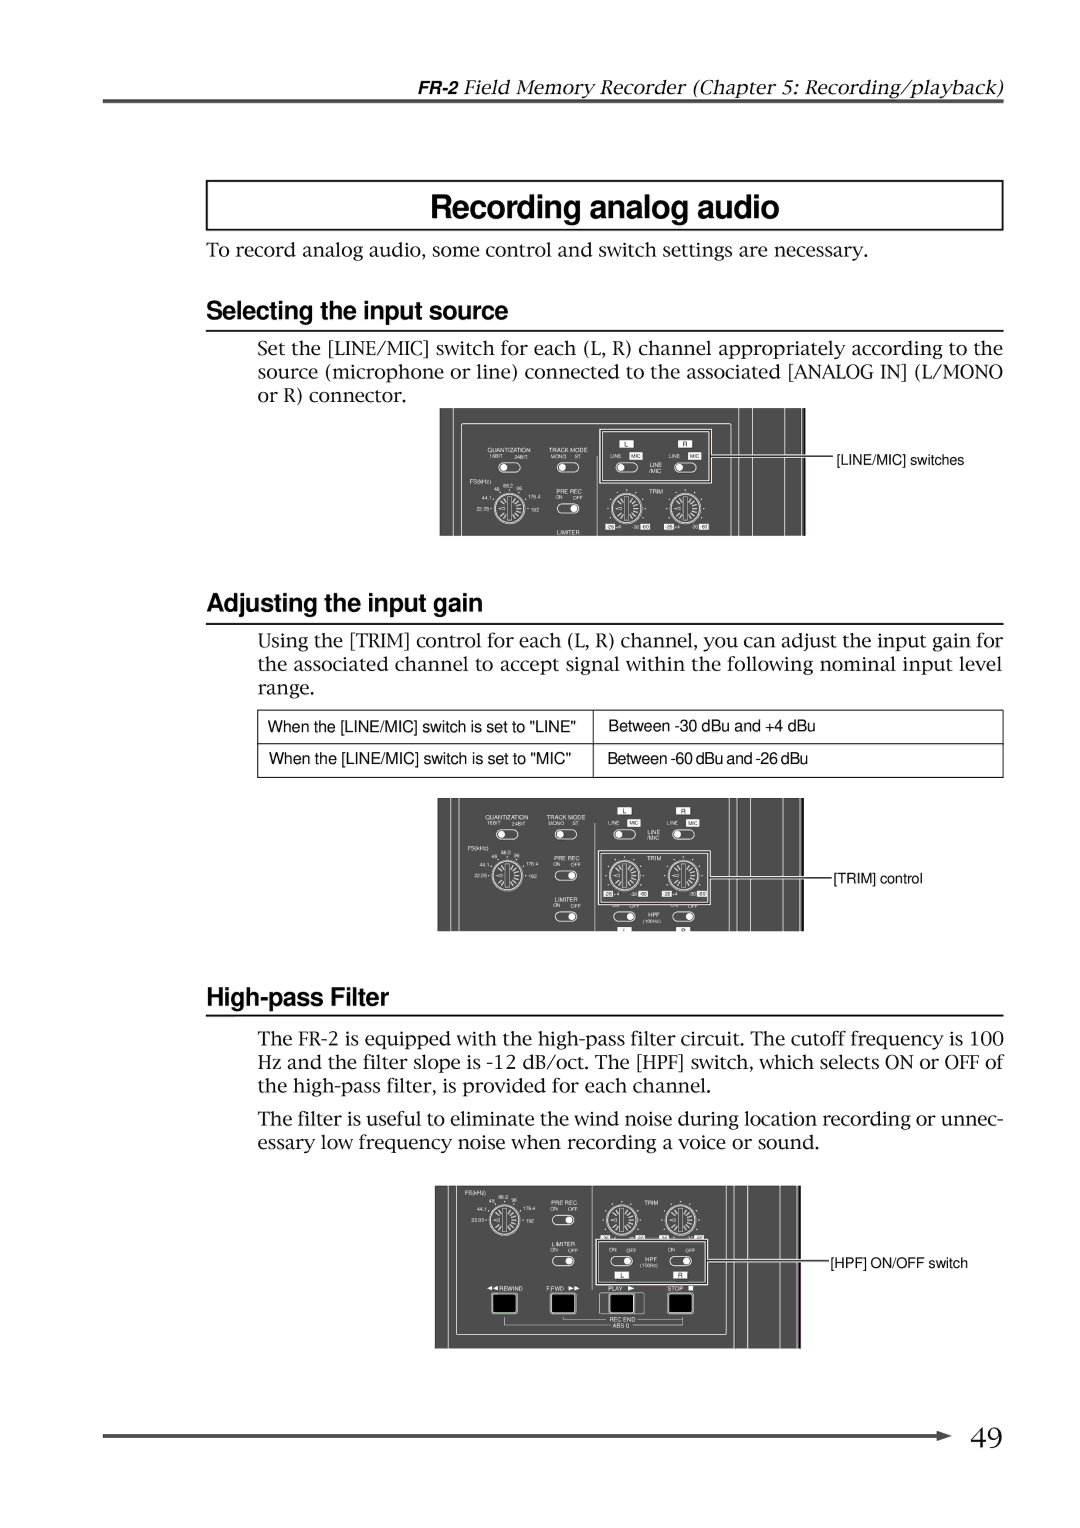 Fostex FR-2 owner manual Recording analog audio, Selecting the input source, Adjusting the input gain, High-pass Filter 